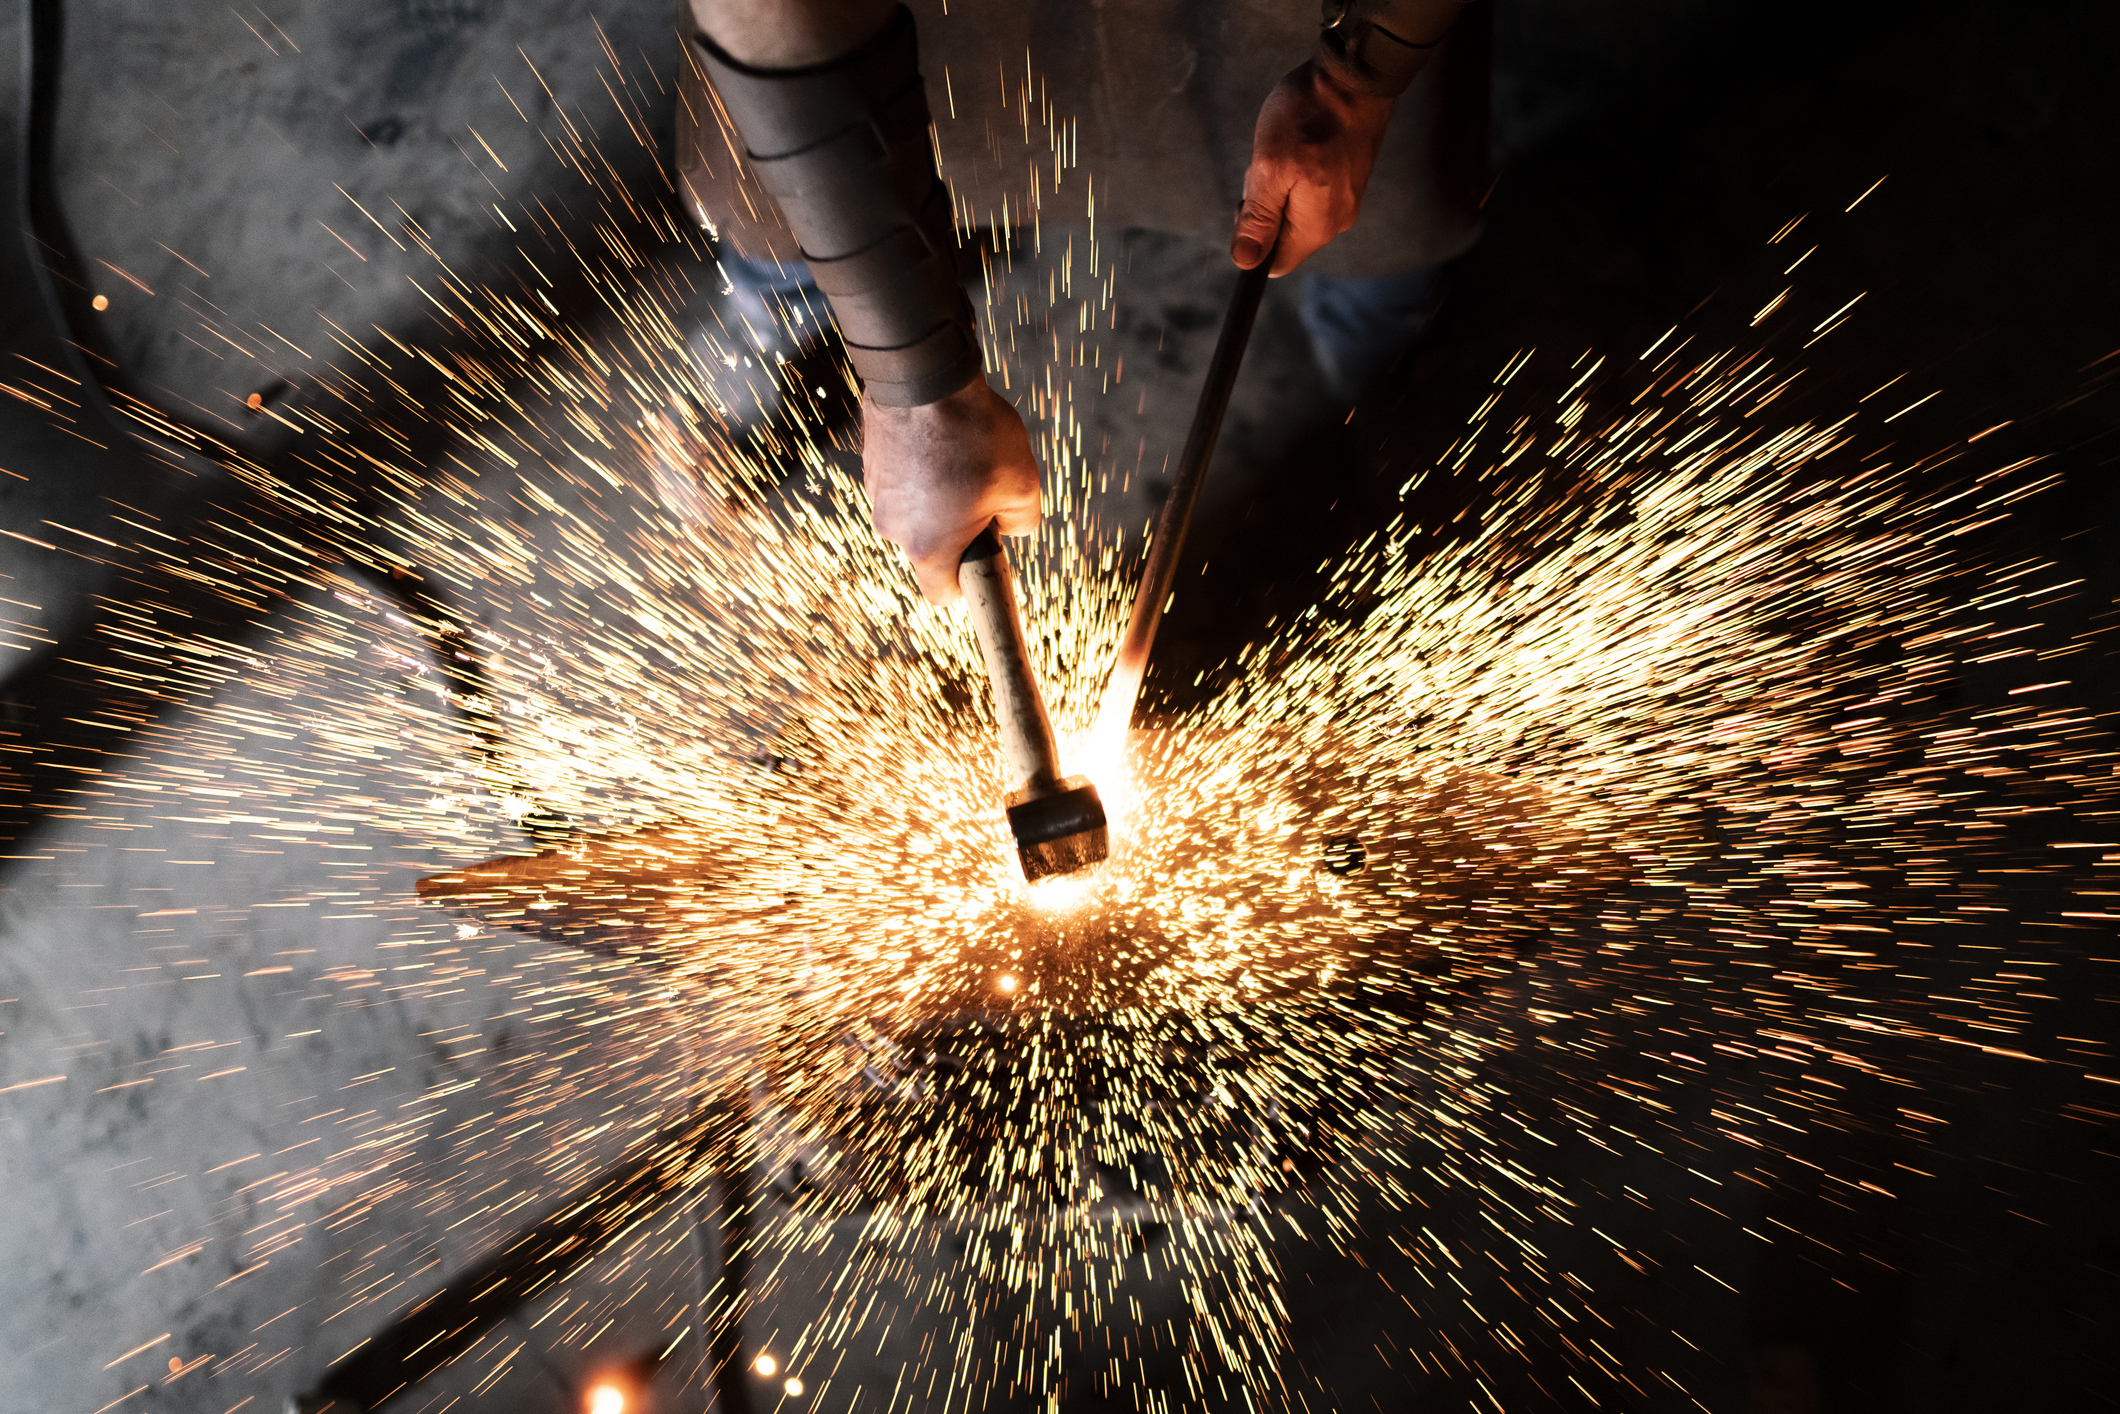 A skilled blacksmith works in his workshop hammering an iron at high temperature on his anvil to create a new piece by making many sparks fly in the dark; hardware startups